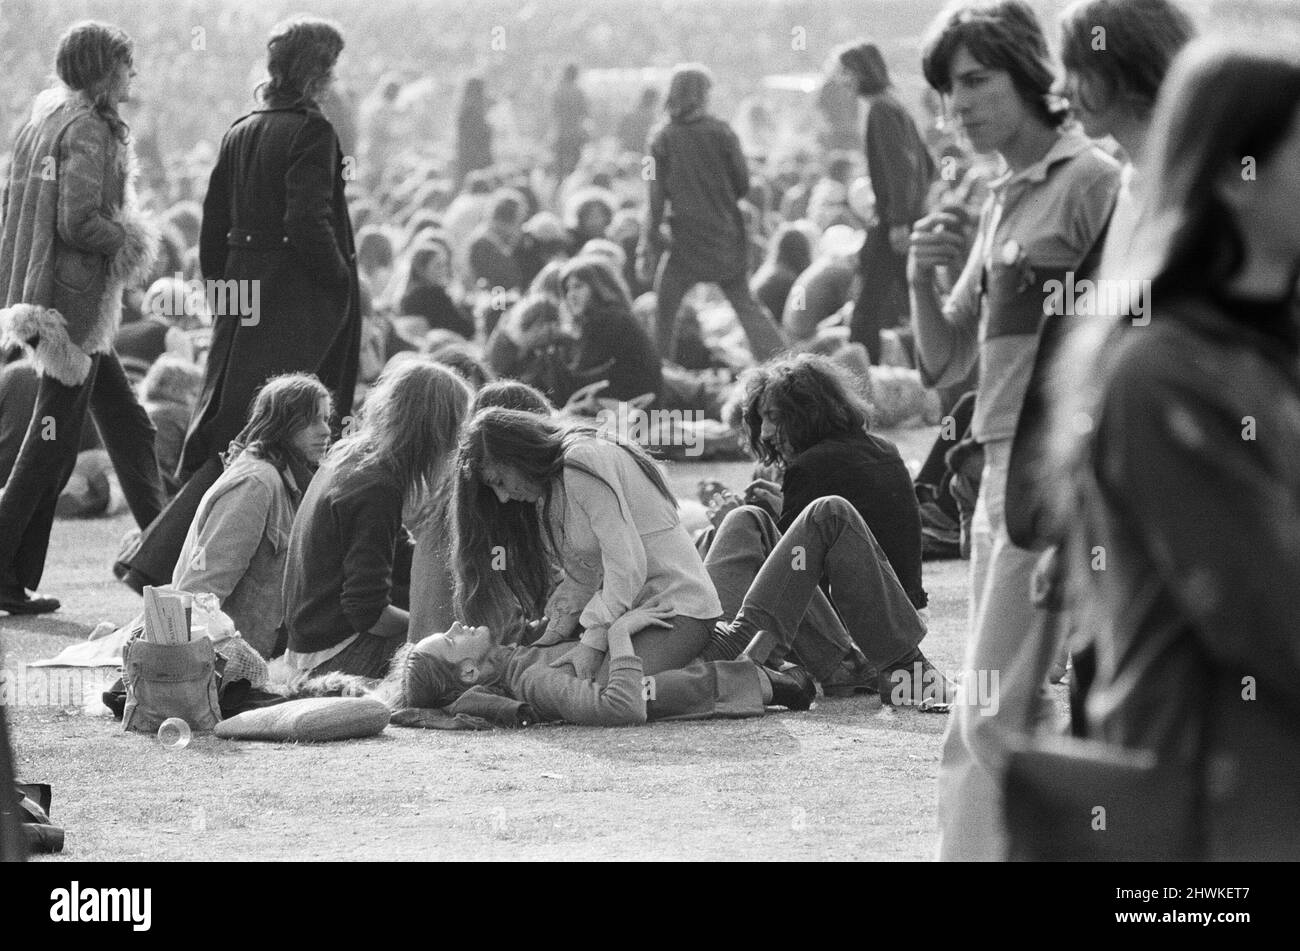 A loving couple, in their own world, just part of the huge crowd and audience enjoying The Oval Pop Festival, Oval Cricket Ground, South London, in the late summer of 1972 On the day, Rod Stewart won Best Male Vocalist 1972, Emerson Lake and Palmer won 7 awards, Maggie Bell and Brian Eno won awards too.  Note in this picture, the man on the left in the sheepskin coat. Classic fashion from the 1970s.  The festival was sponsored by Music Magazine Melody Maker  Picture taken 30th September 1972 Stock Photo